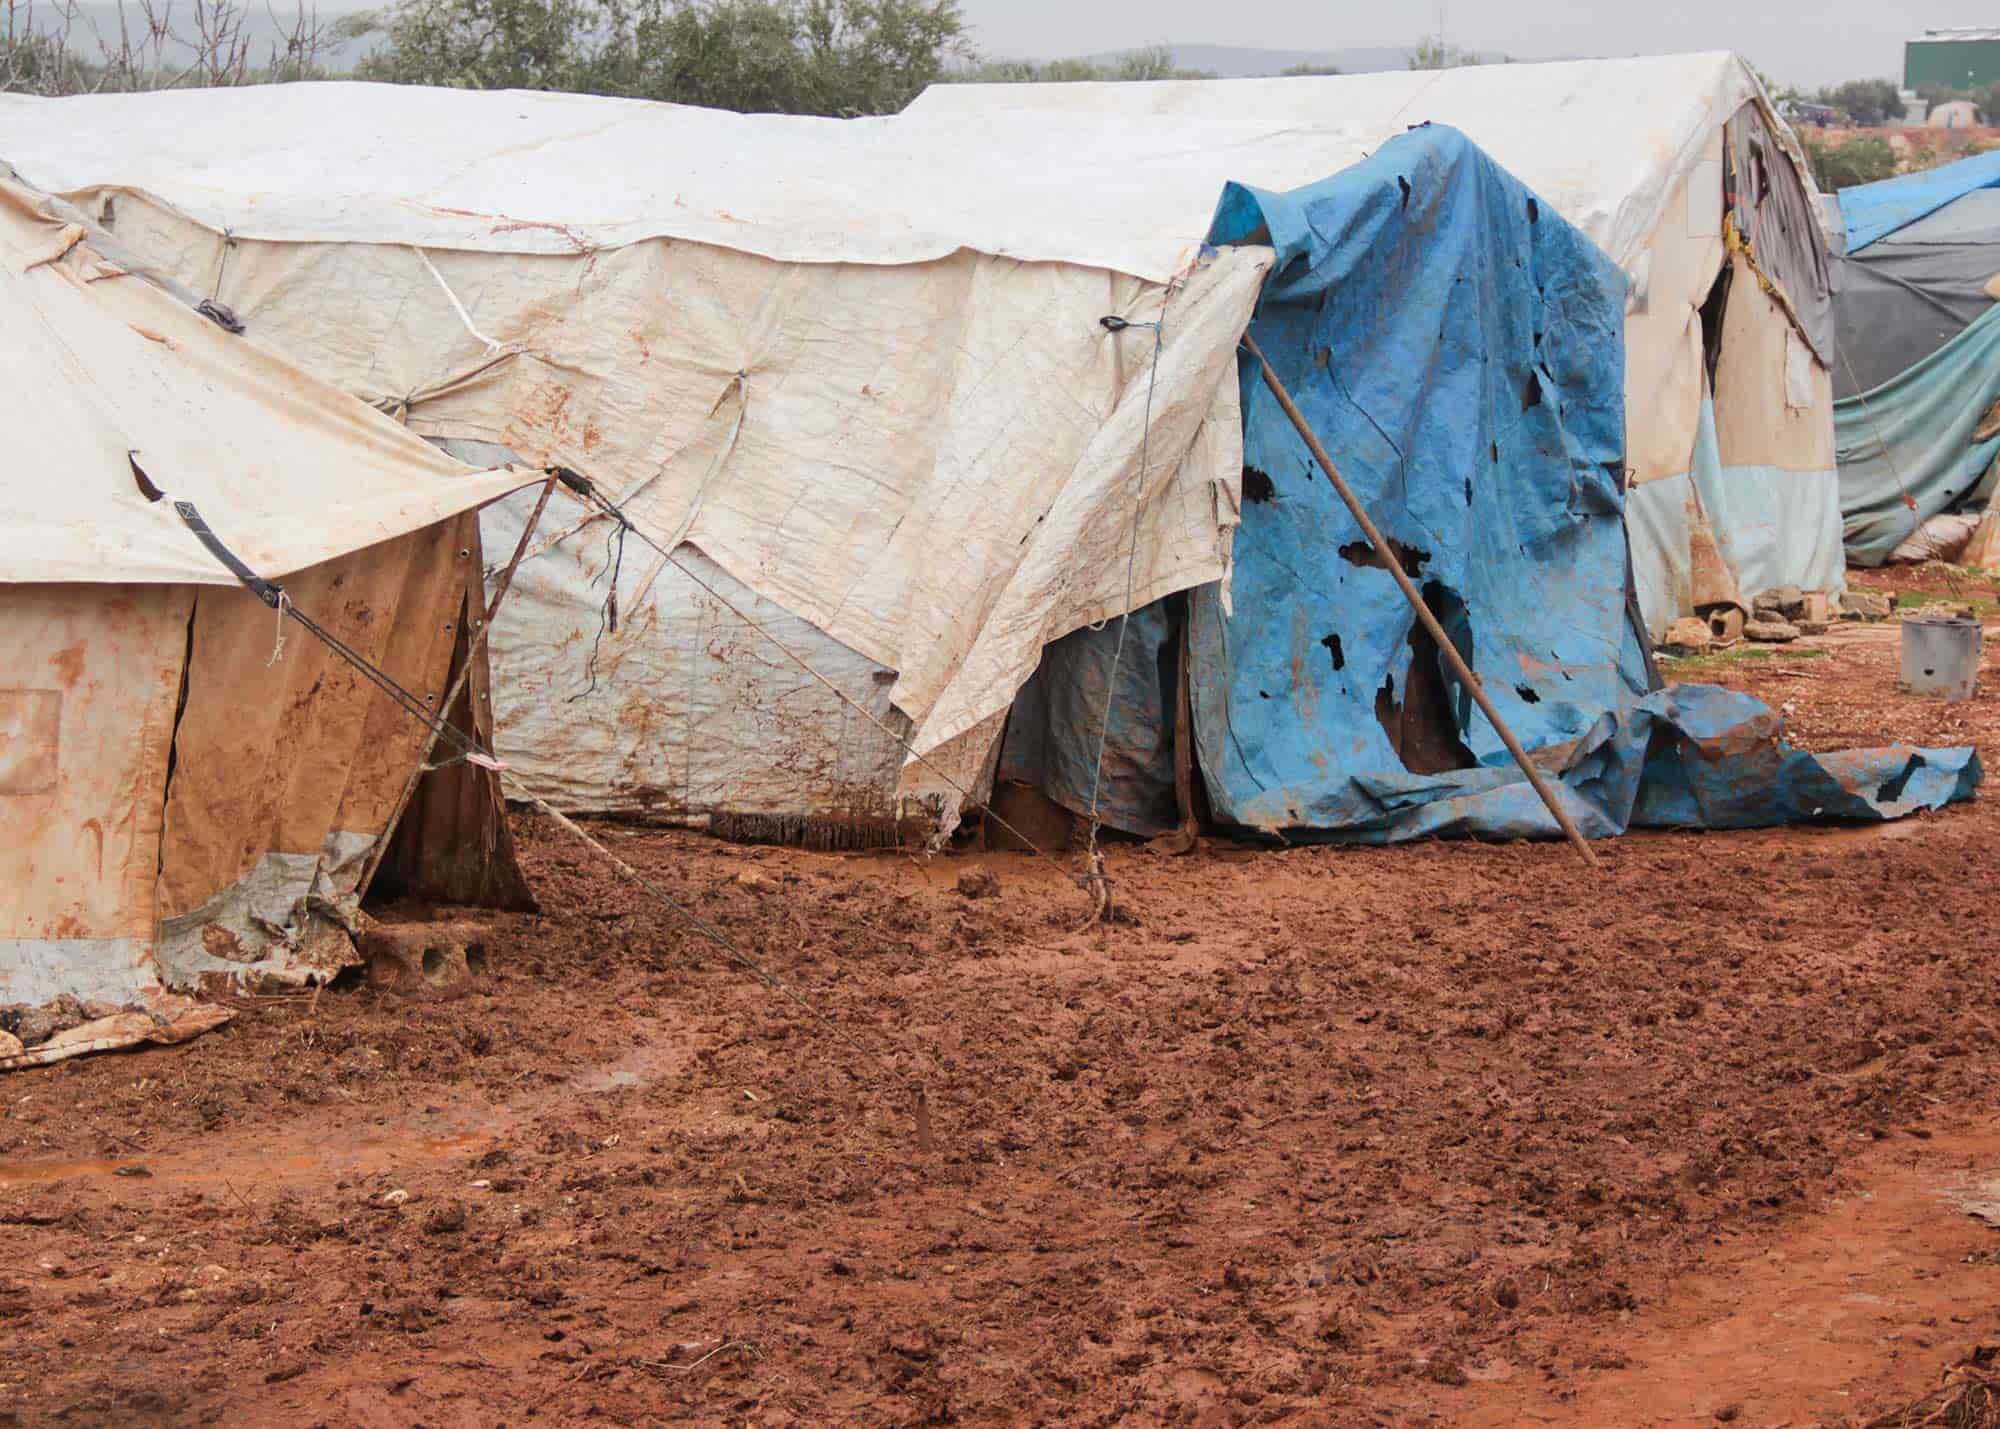 An Old tents inside syria in winter - Violet organization